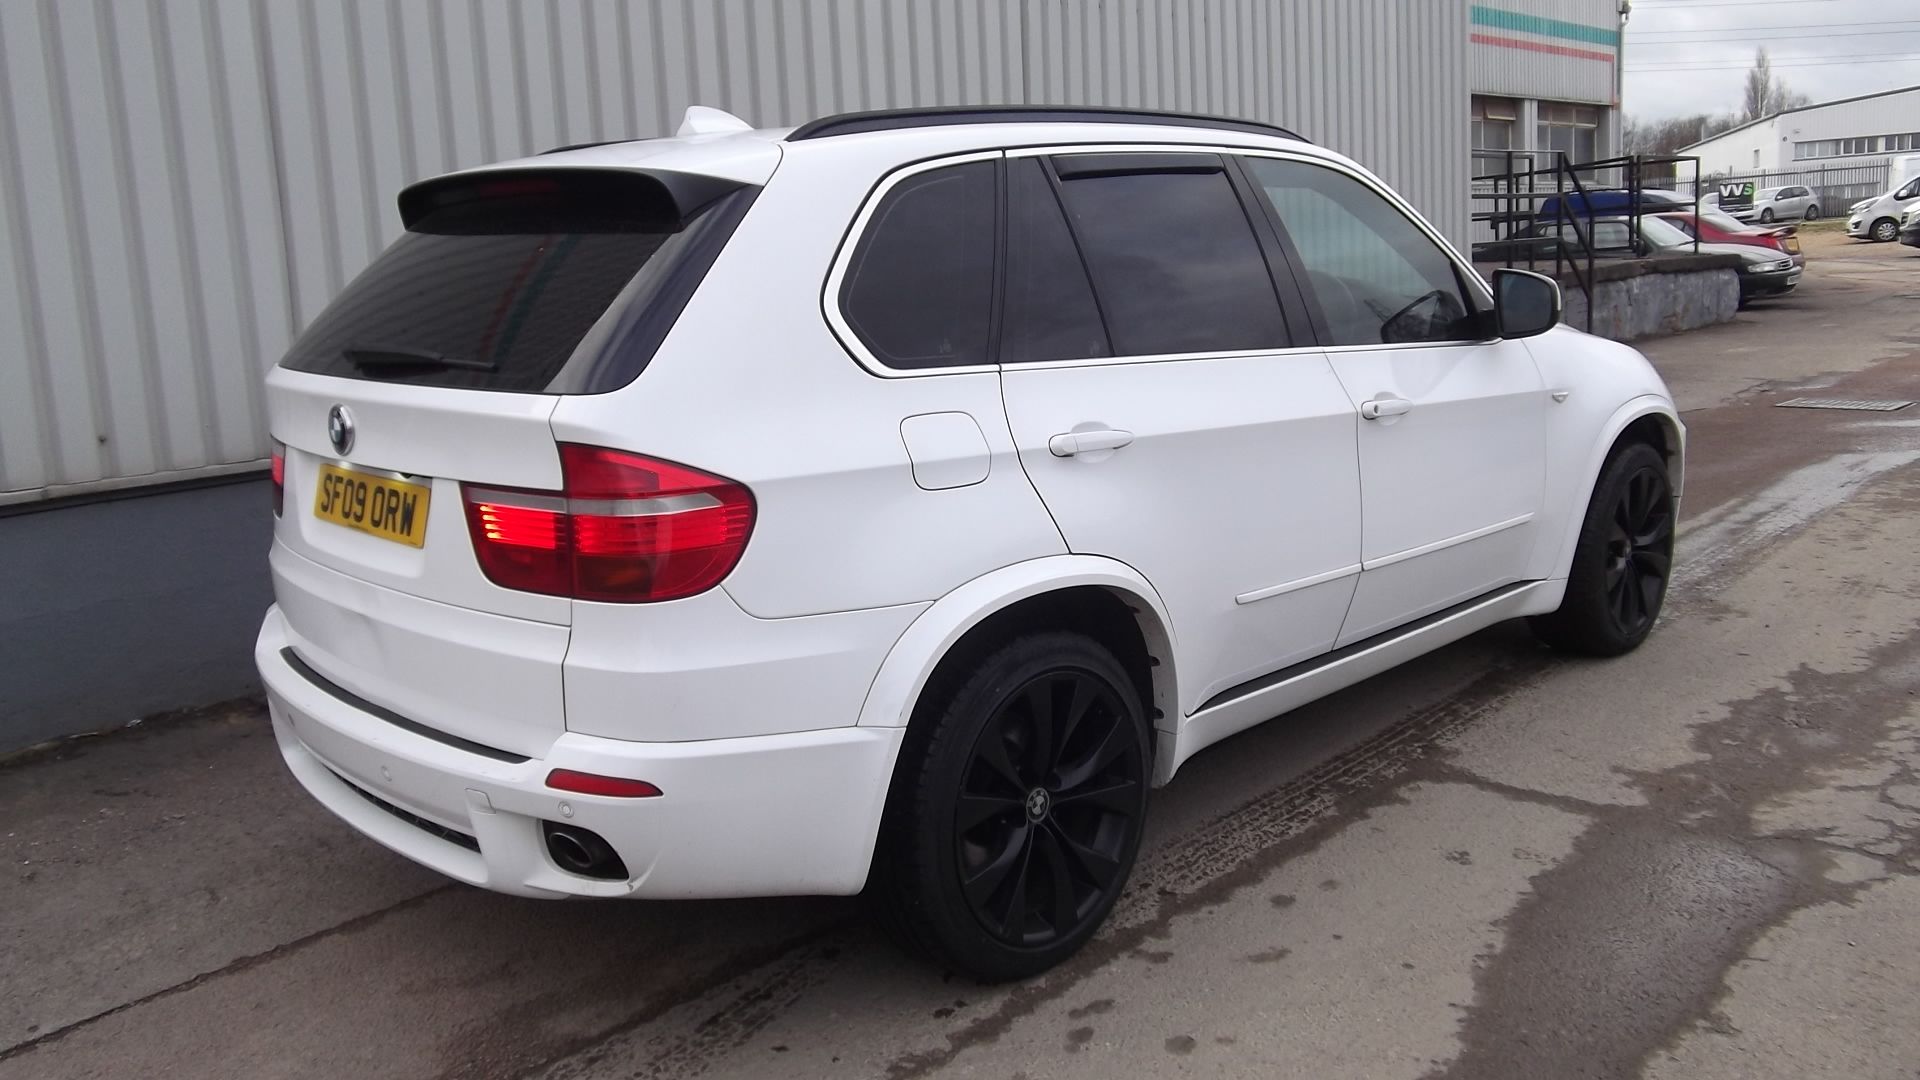 2009 BMW X5 35D M Sport X Drive 3.0 5 Dr 4x4 - CL505 - NO VAT ON THE HAMM - Image 5 of 22